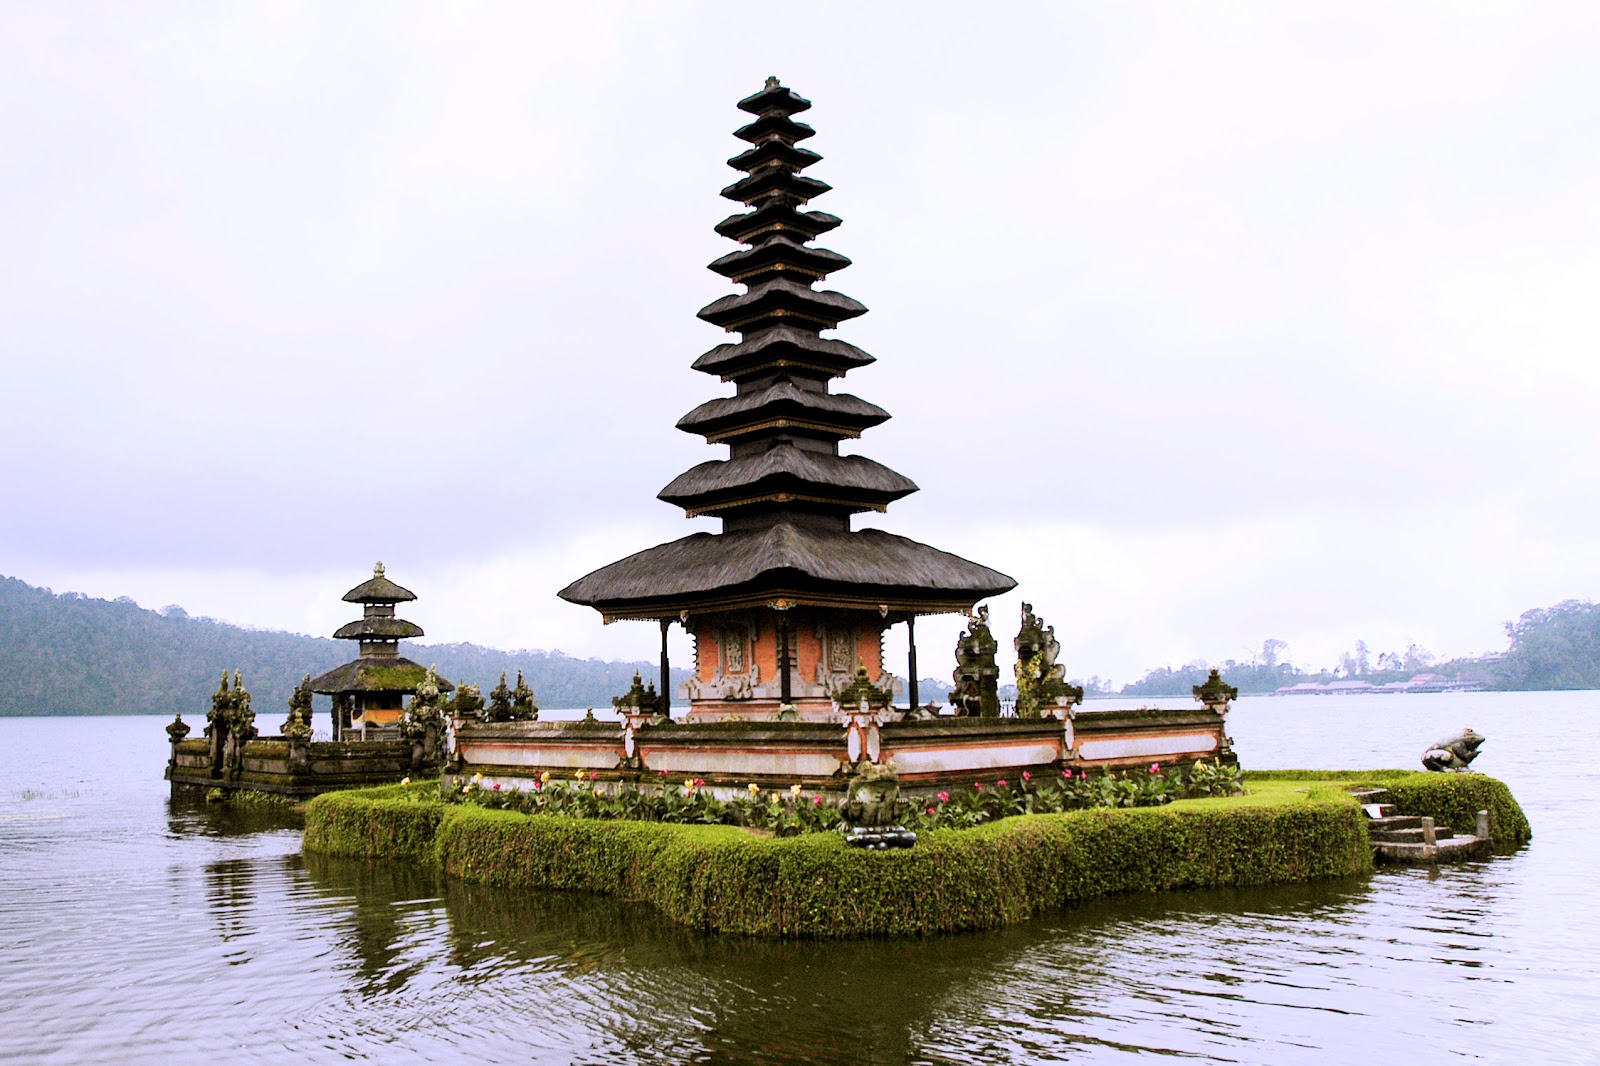 Pictures of Bali ultimate holiday destination